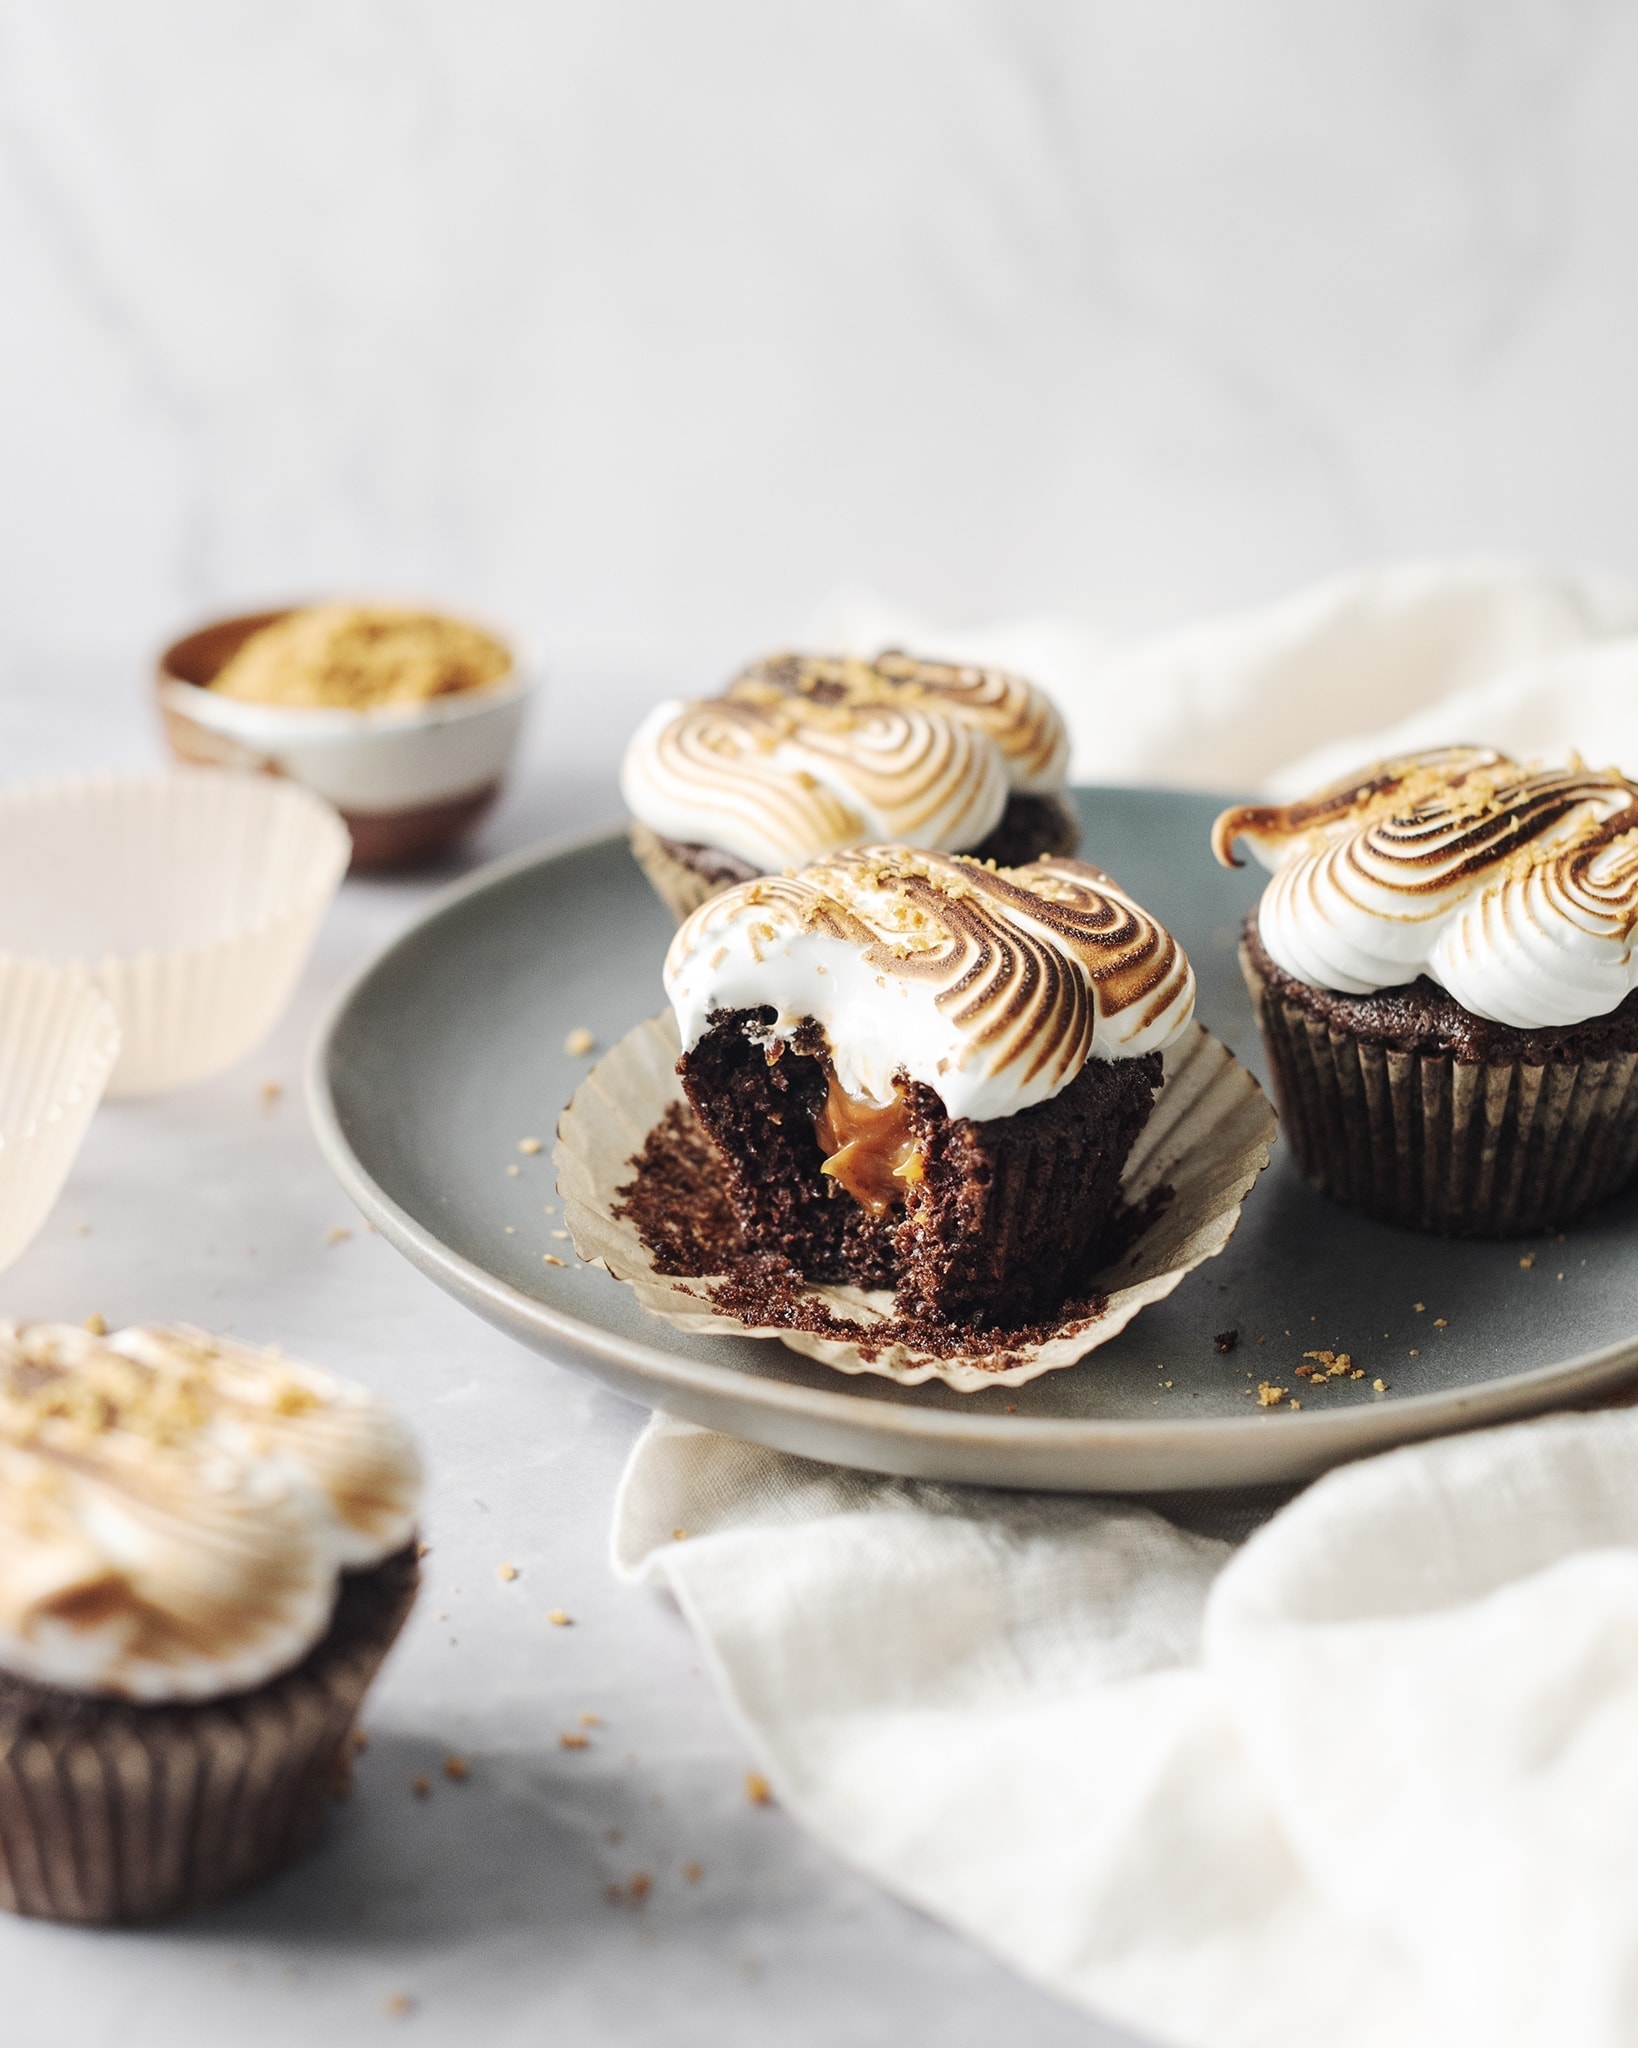 S'mores cupcakes with a bite taken out of one to reveal the caramel filling inside